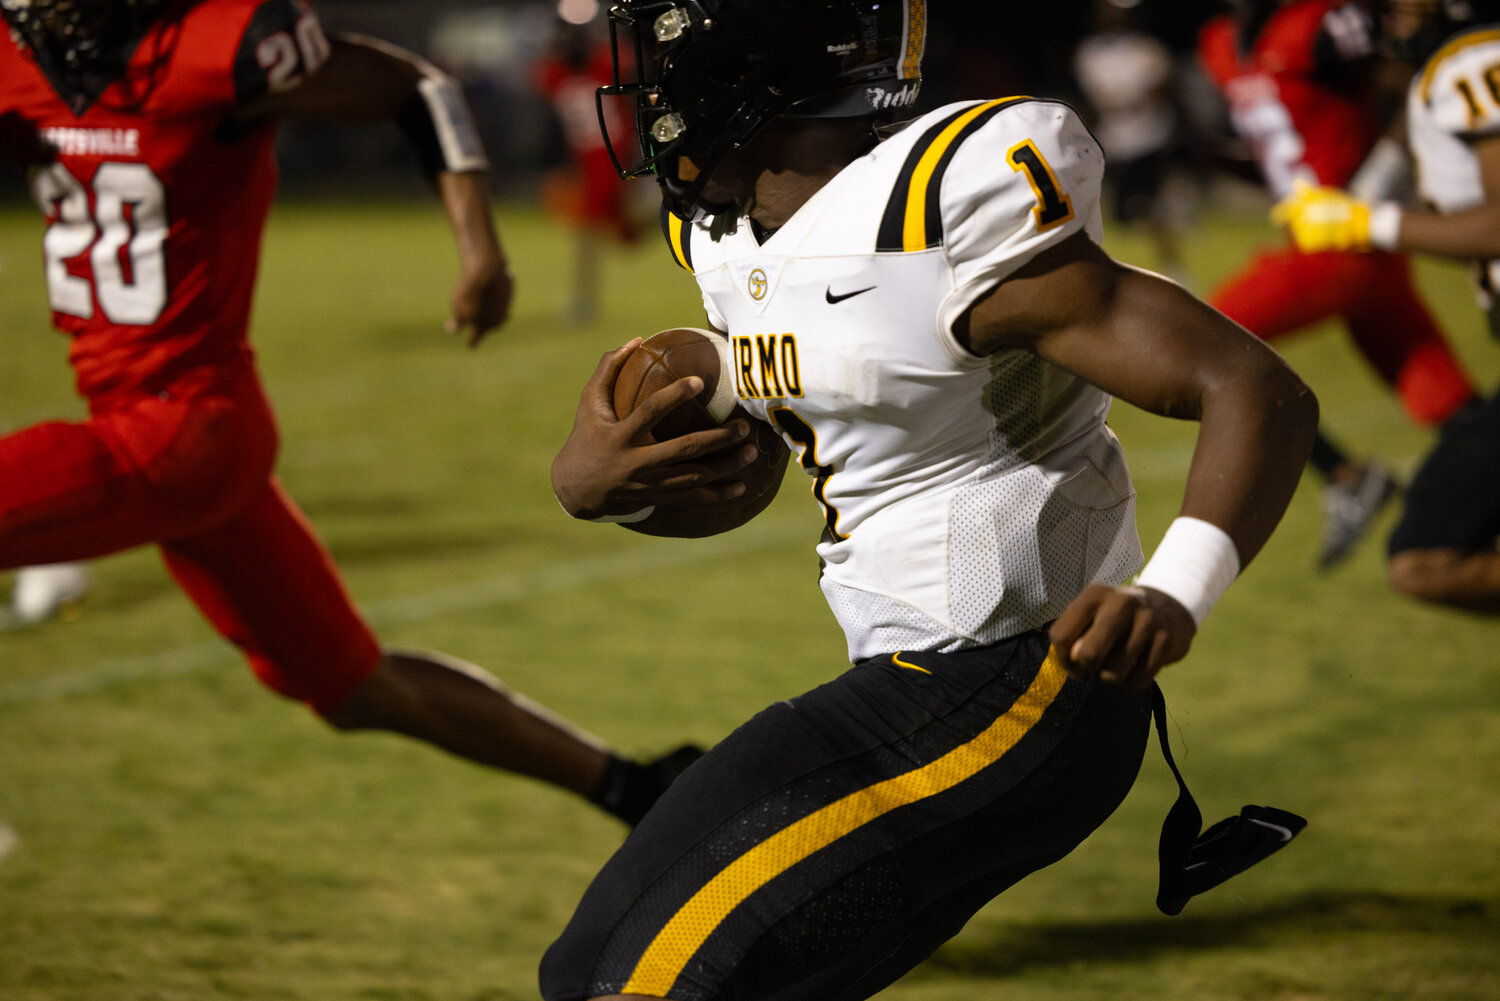 Yellow Jackets quarterback Aaron Brand runs the ball down the field in the second quarter of Irmo's 35-21 win over Hartsville.